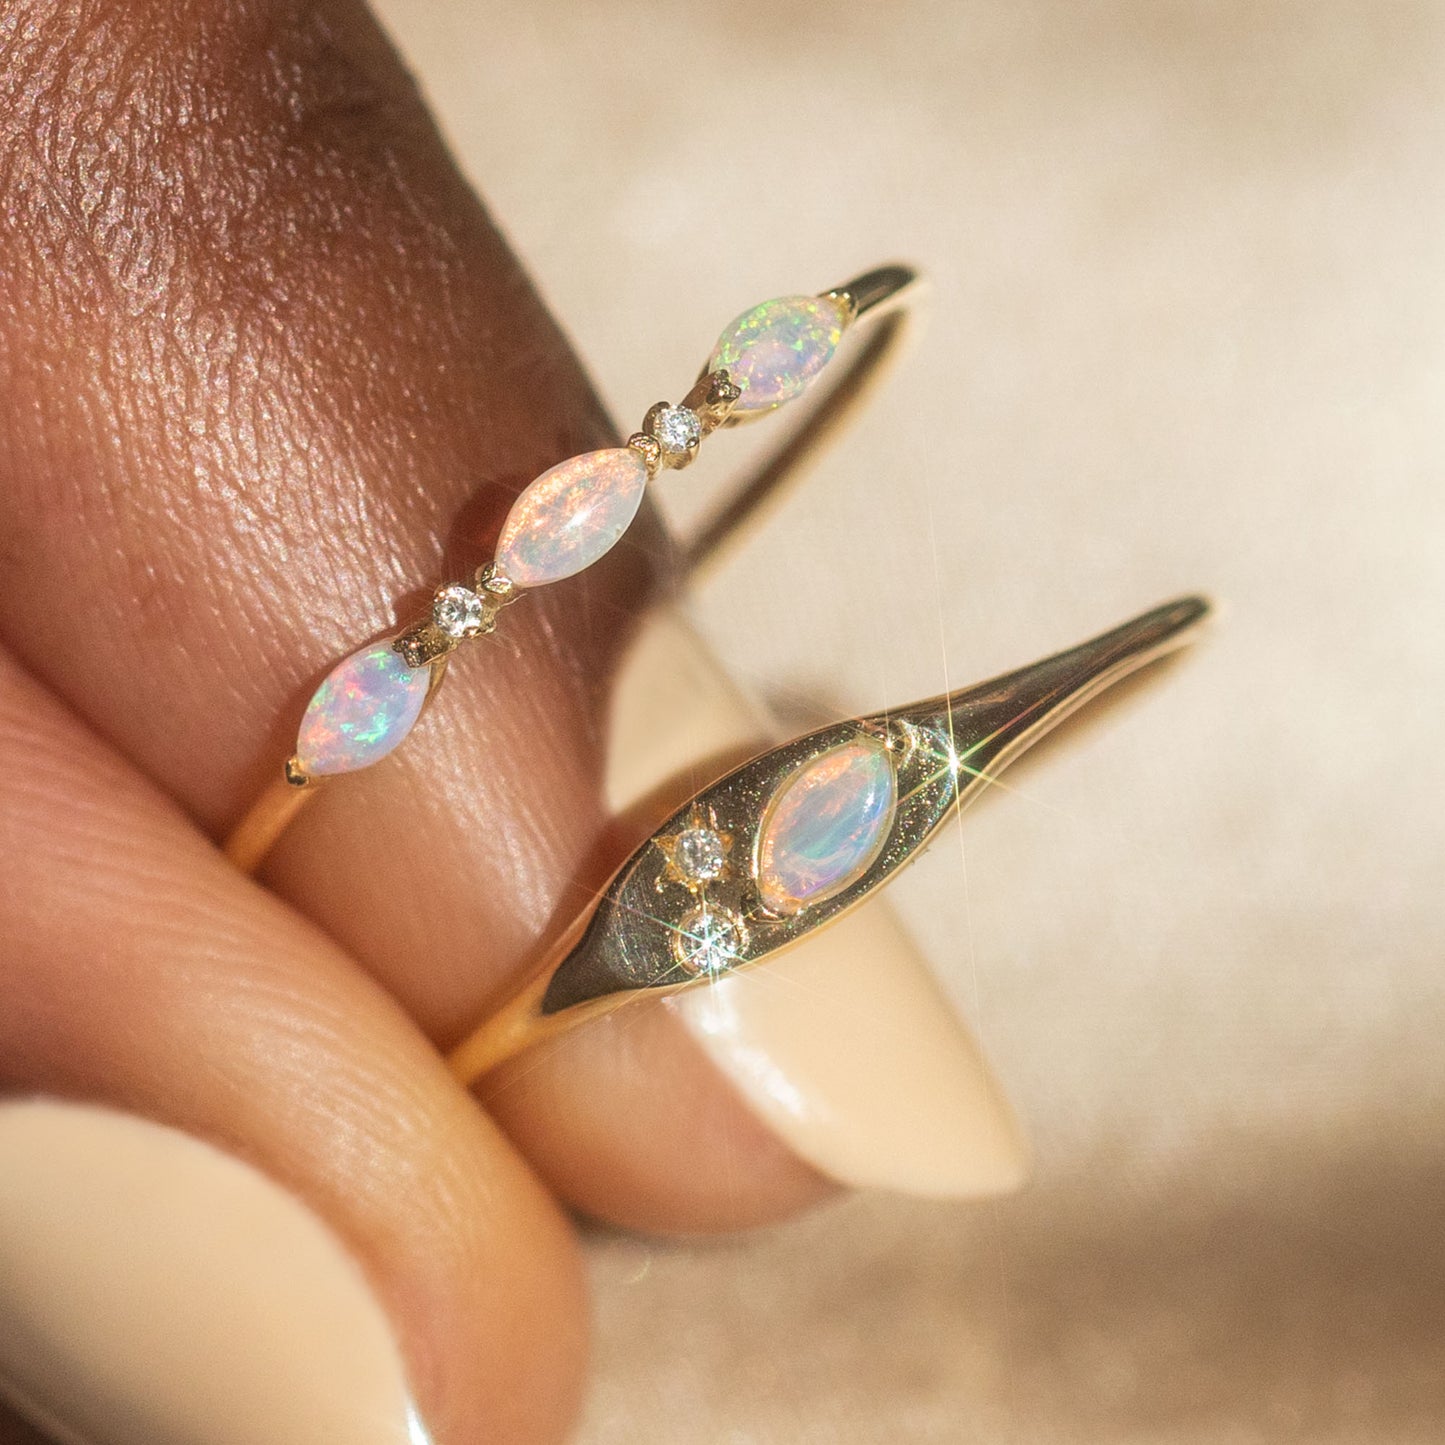 Solid Gold Opal and Diamond Signet Ring